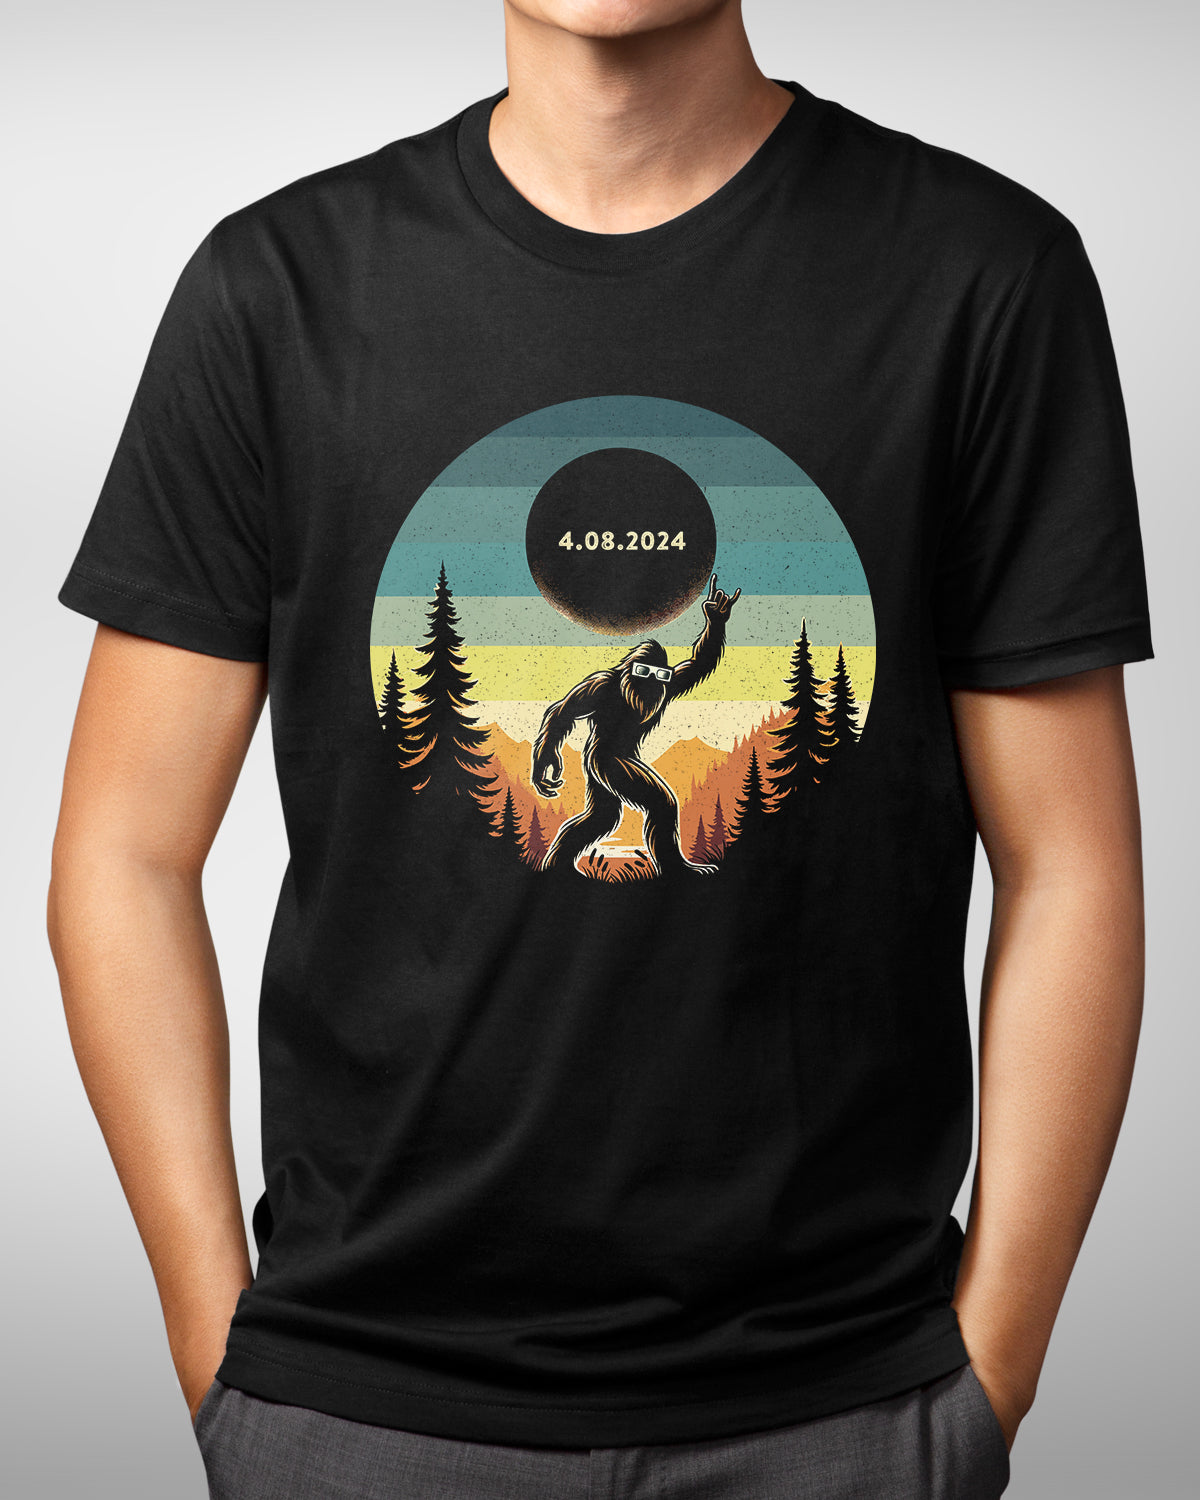 Solar Eclipse 2024 Bigfoot Shirt, Funny Yeti Astronomy Tee, Totality Party, Sasquatch Astrology Gift, Celestial Event Enthusiast